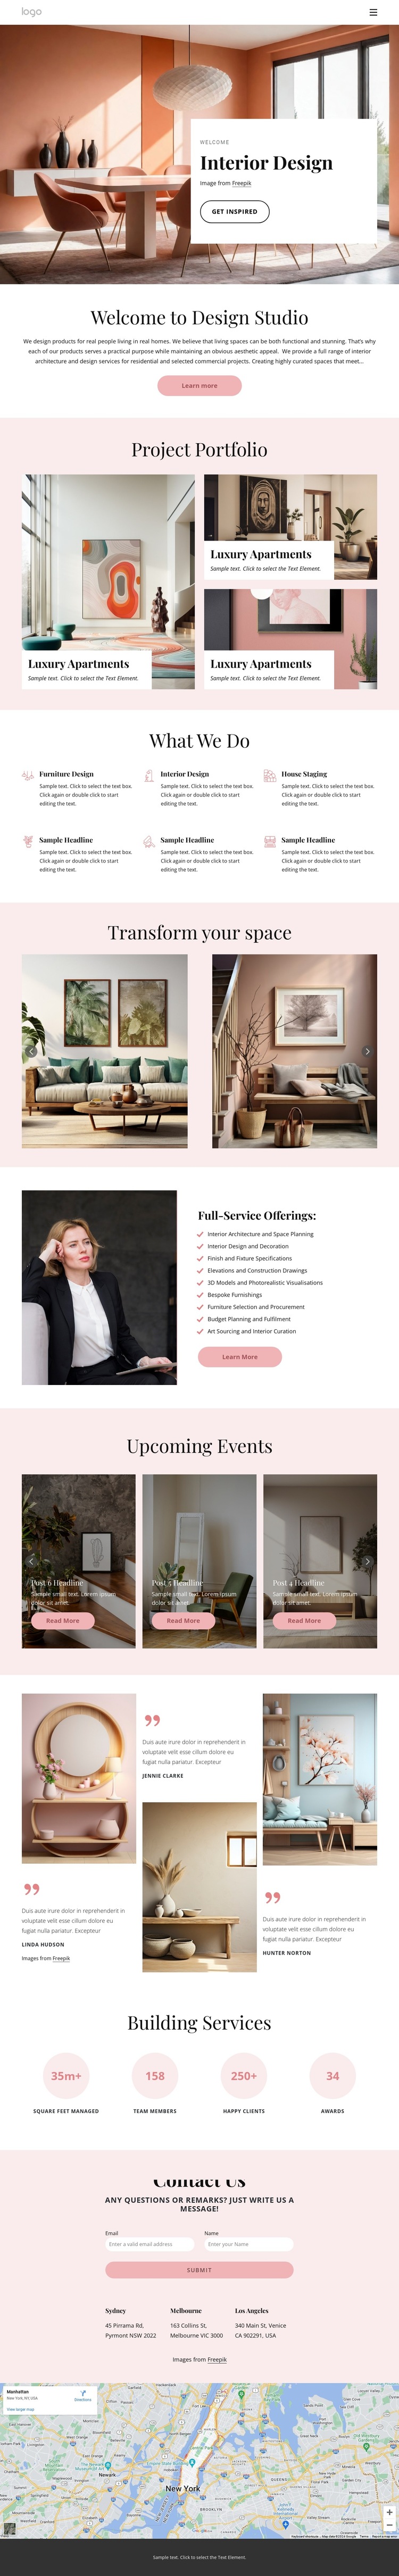 The interior design firm HTML5 Template